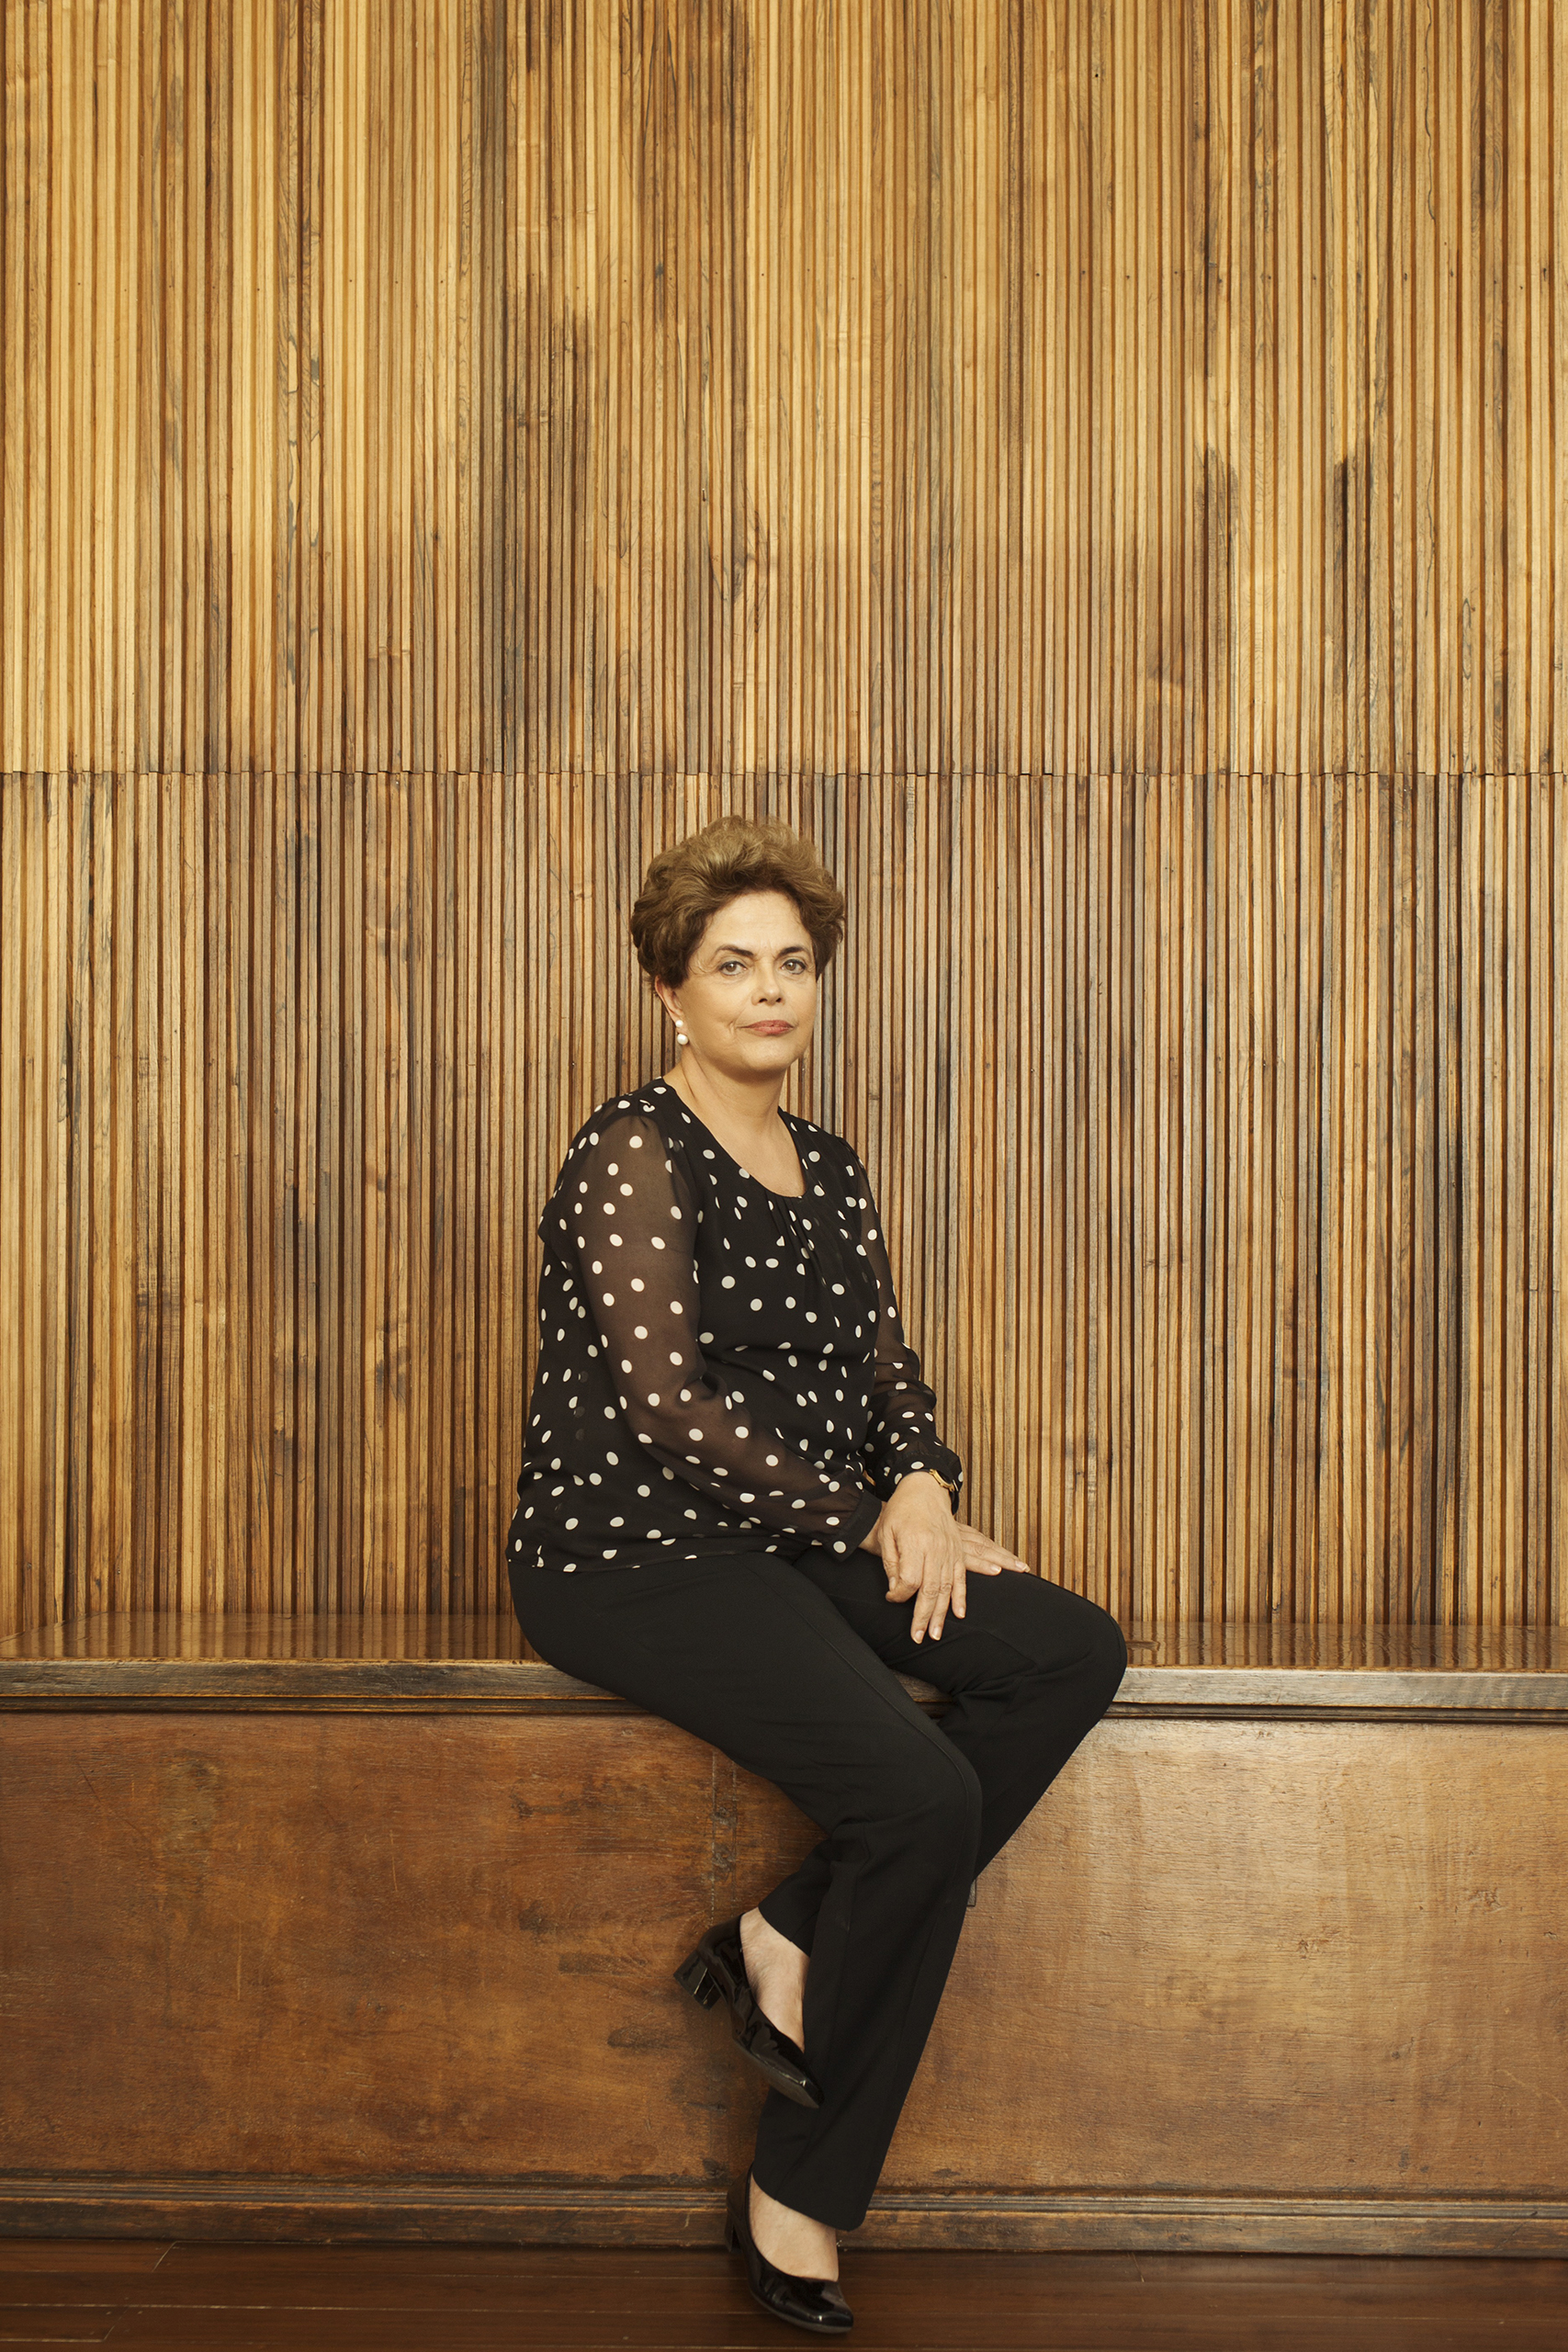 Suspended Brazilian President Dilma Rousseff at the Alvorada residential palace in Brasilia on July 22, 2016.